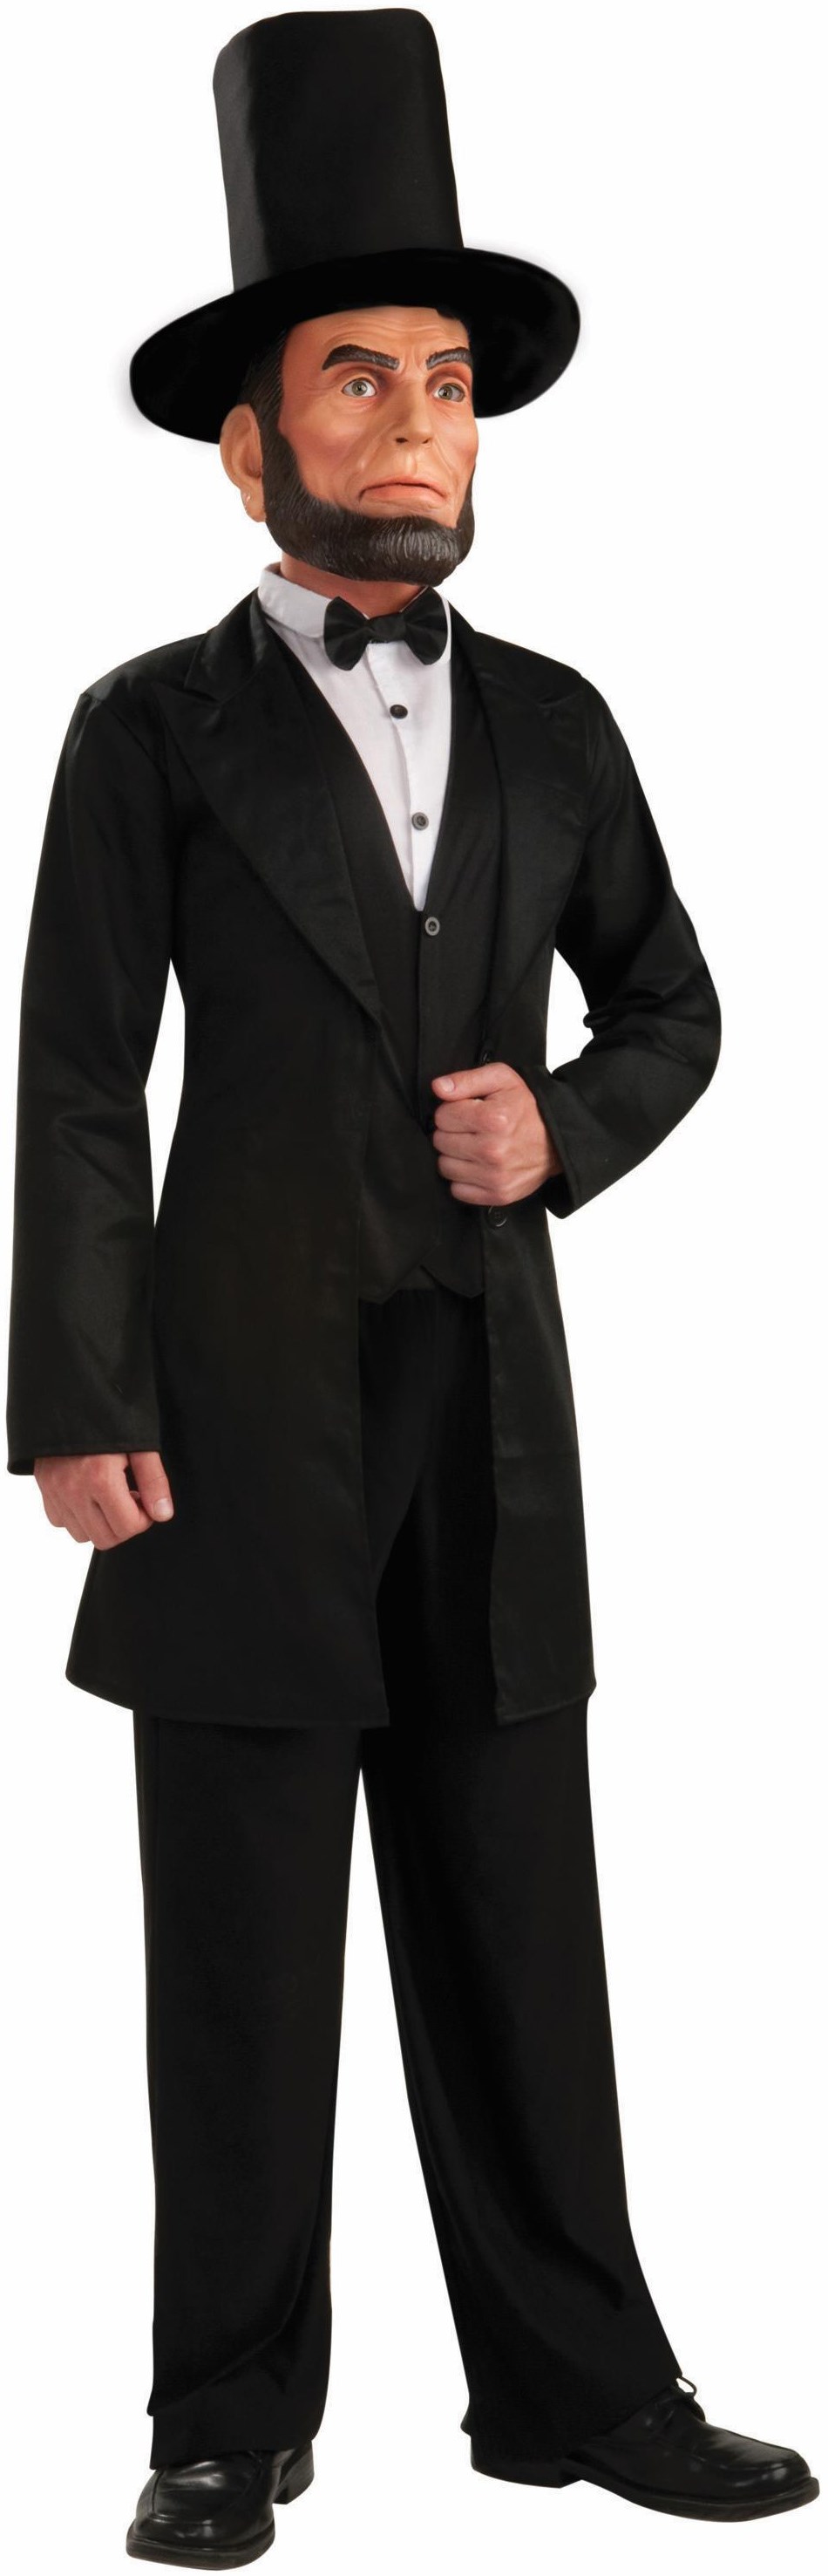 Abraham Lincoln Deluxe Adult Costume